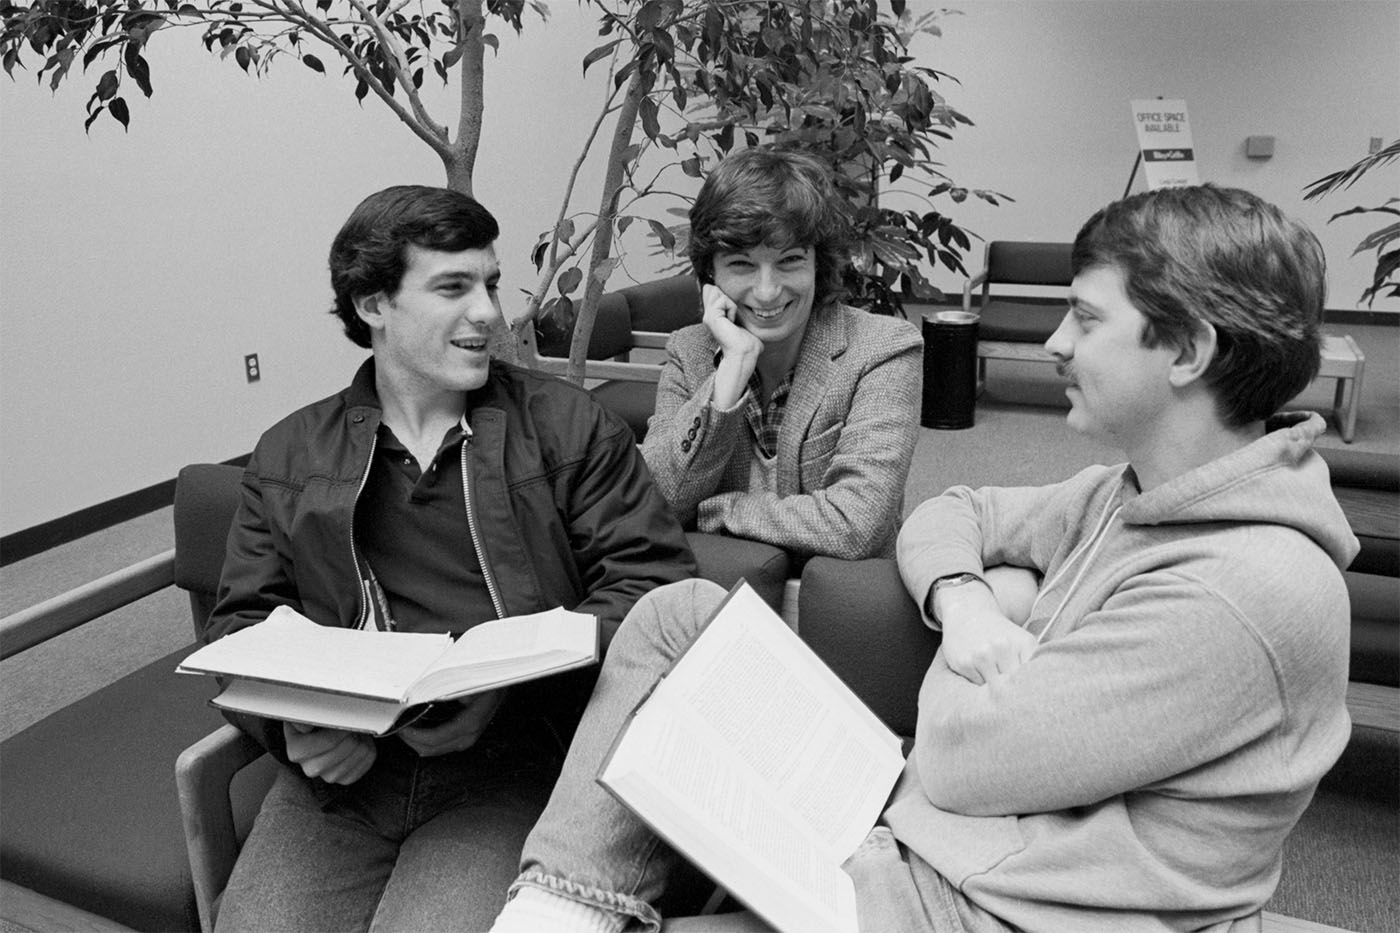 Students in conversation at Norton Clapp Law Center in Tacoma, WA - 1980s